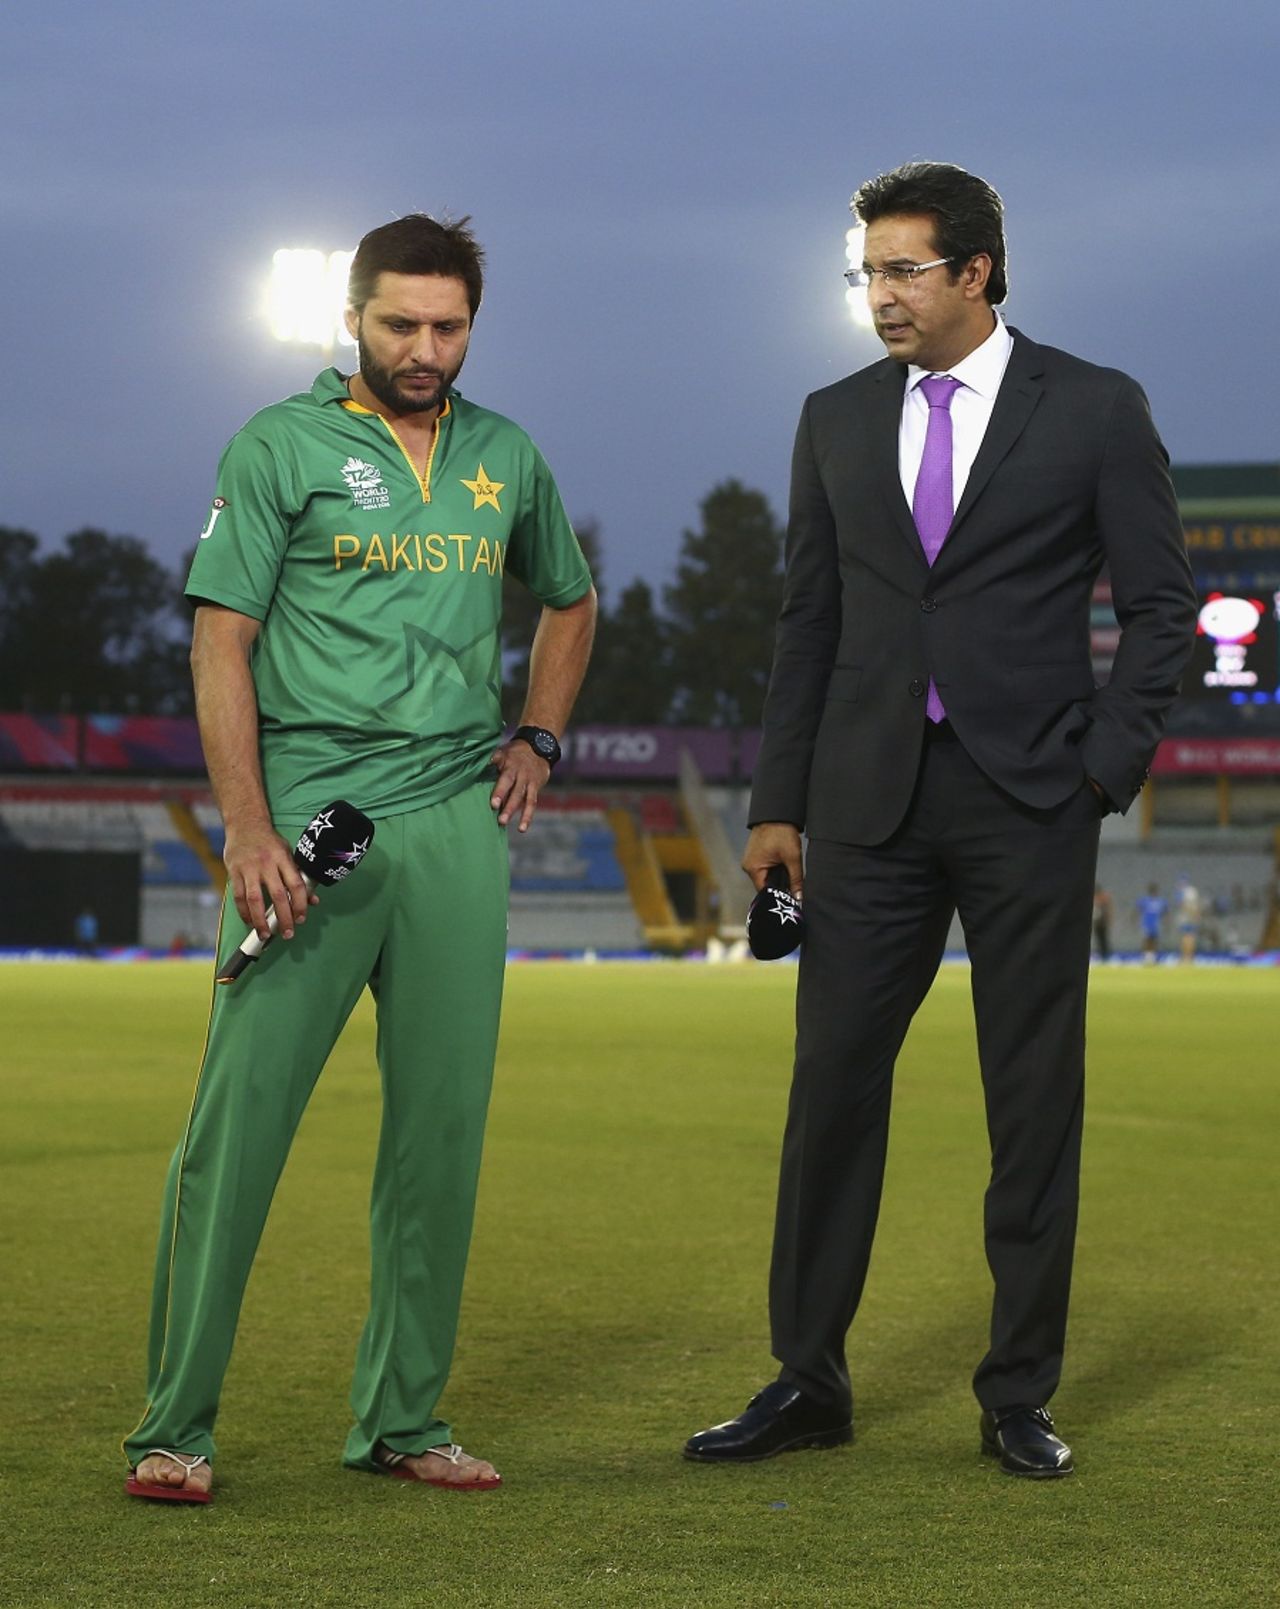 Shahid Afridi and Wasim Akram stand for a TV interview after Pakistan's loss, Australia v Pakistan, World T20 2016, Group 2, Mohali, March 25, 2016